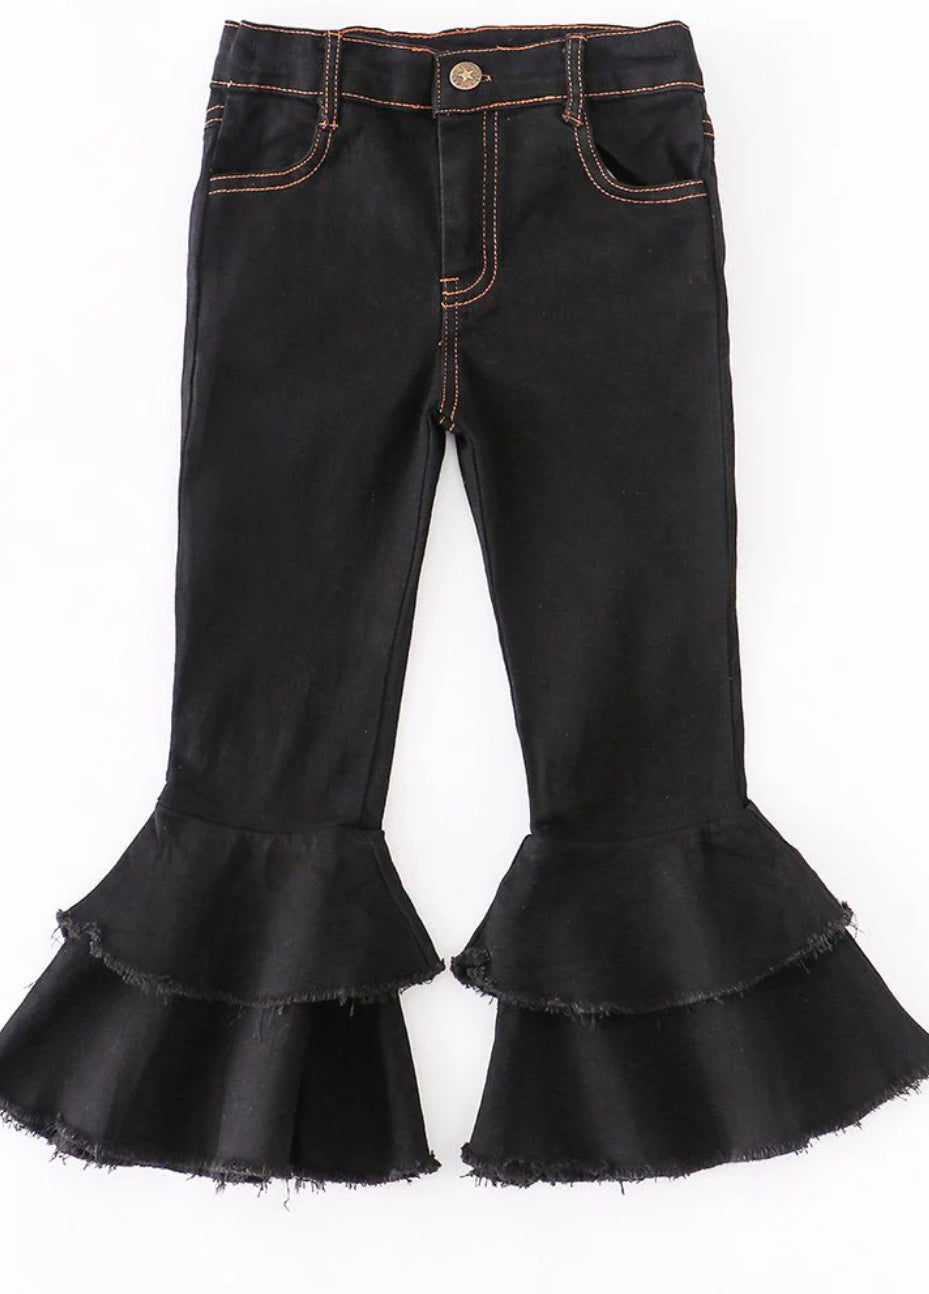 Honeydew Black Double Layered Bell Bottom Fray Jeans (Ying Shan)